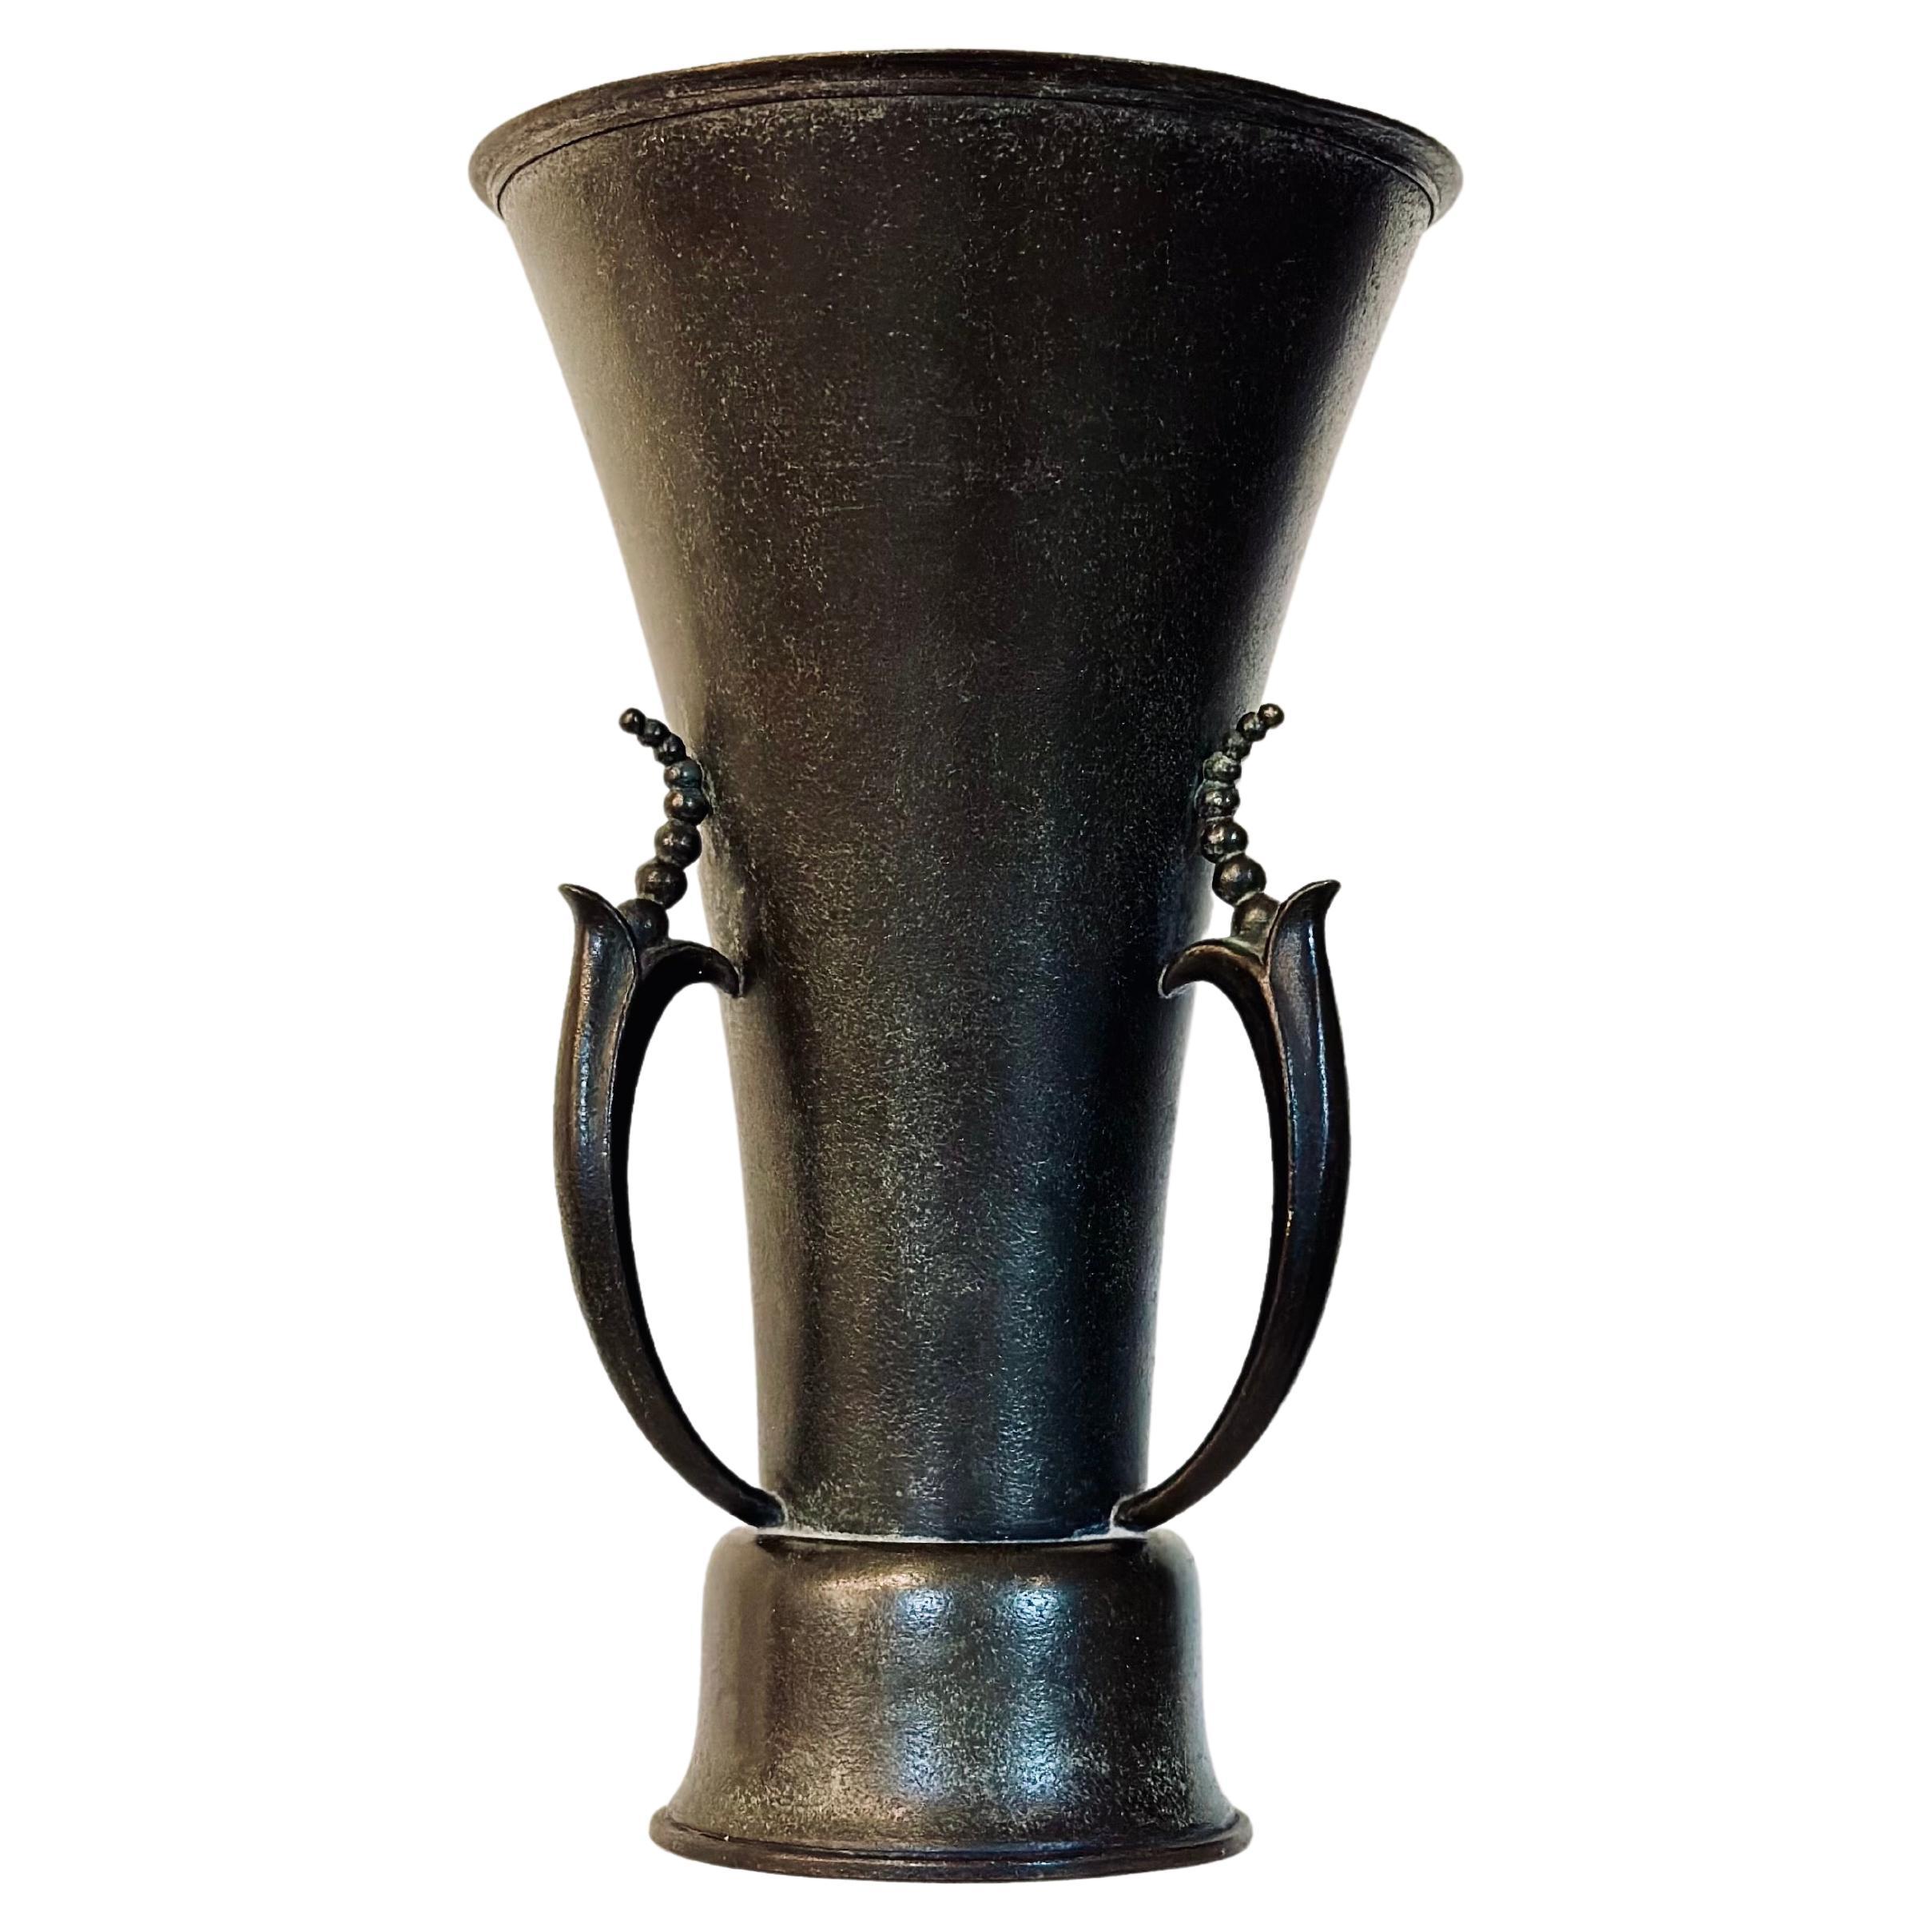 Elegant patinated bronze vase from Ystad Metall. Wide mouth, tapering towards the base that is adorned with beautiful flowers. Marked 